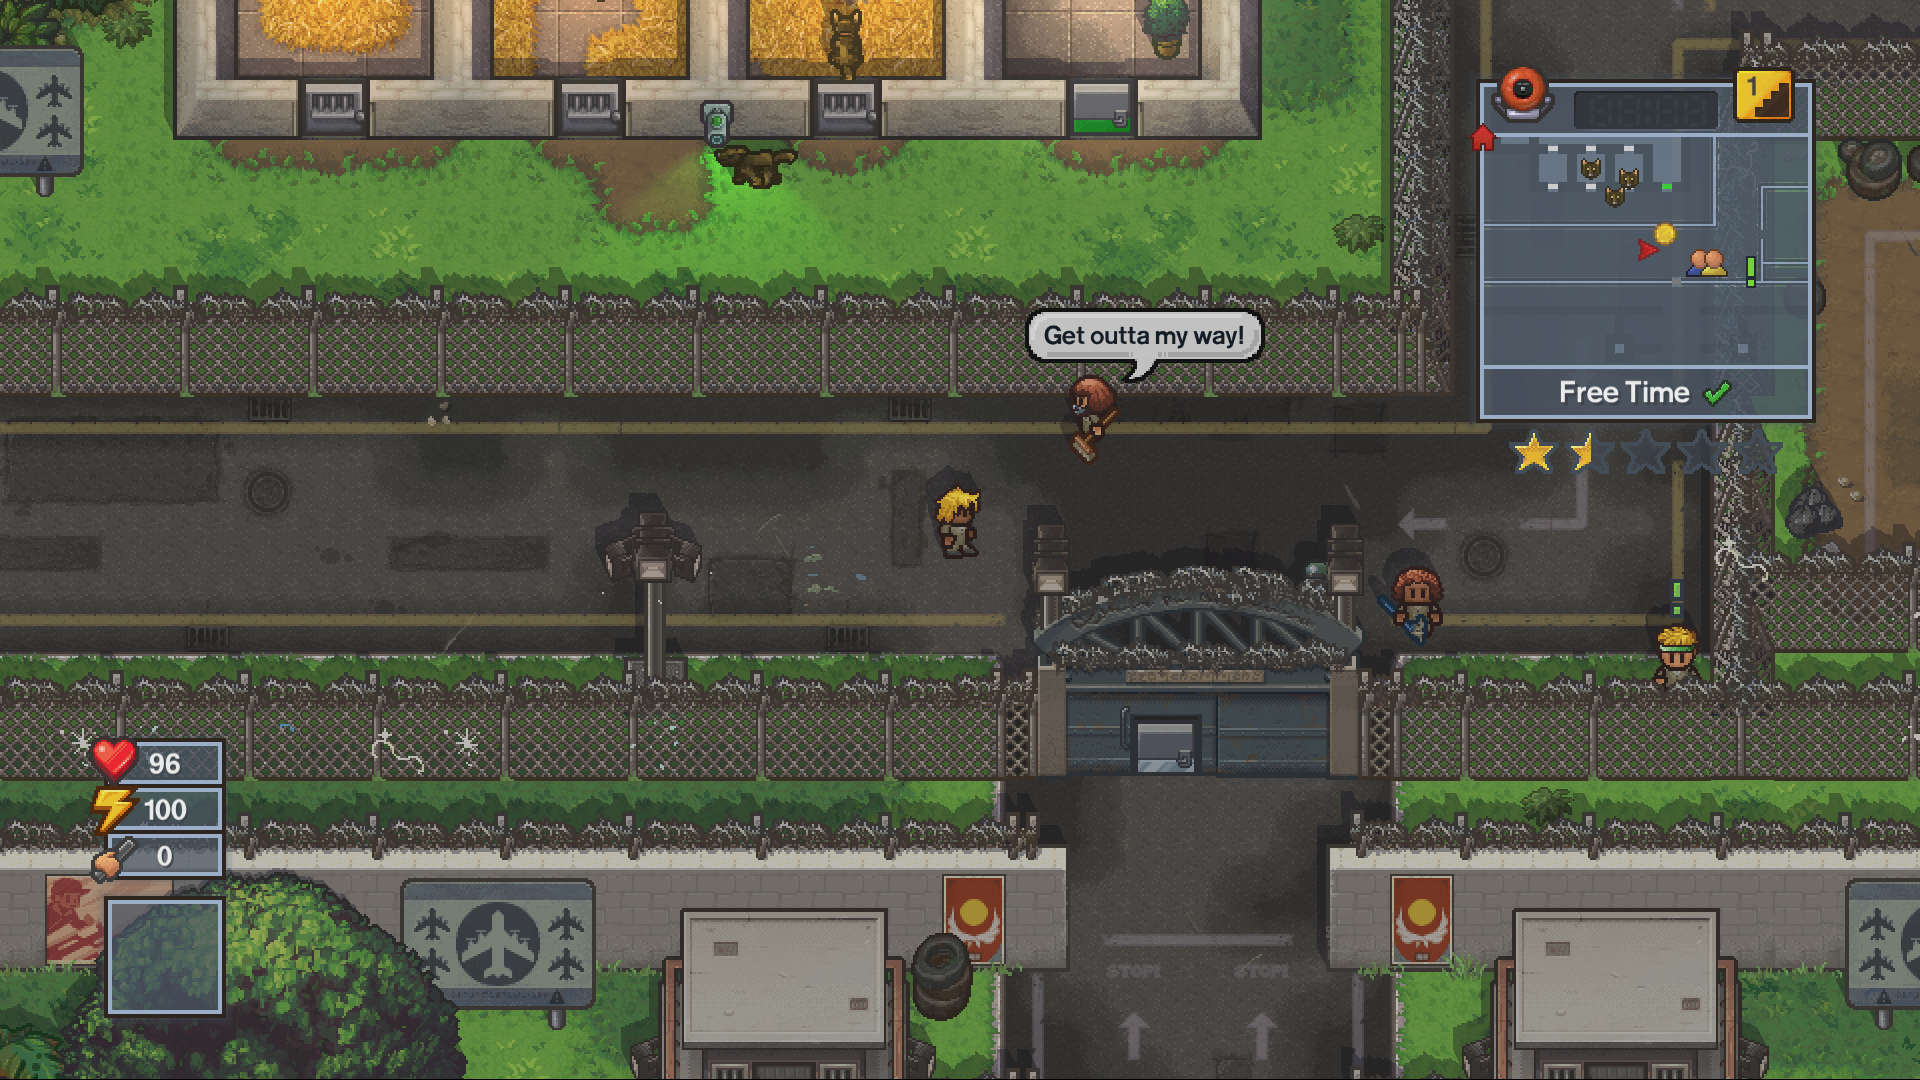 free download the escapists 2 the glorious regime